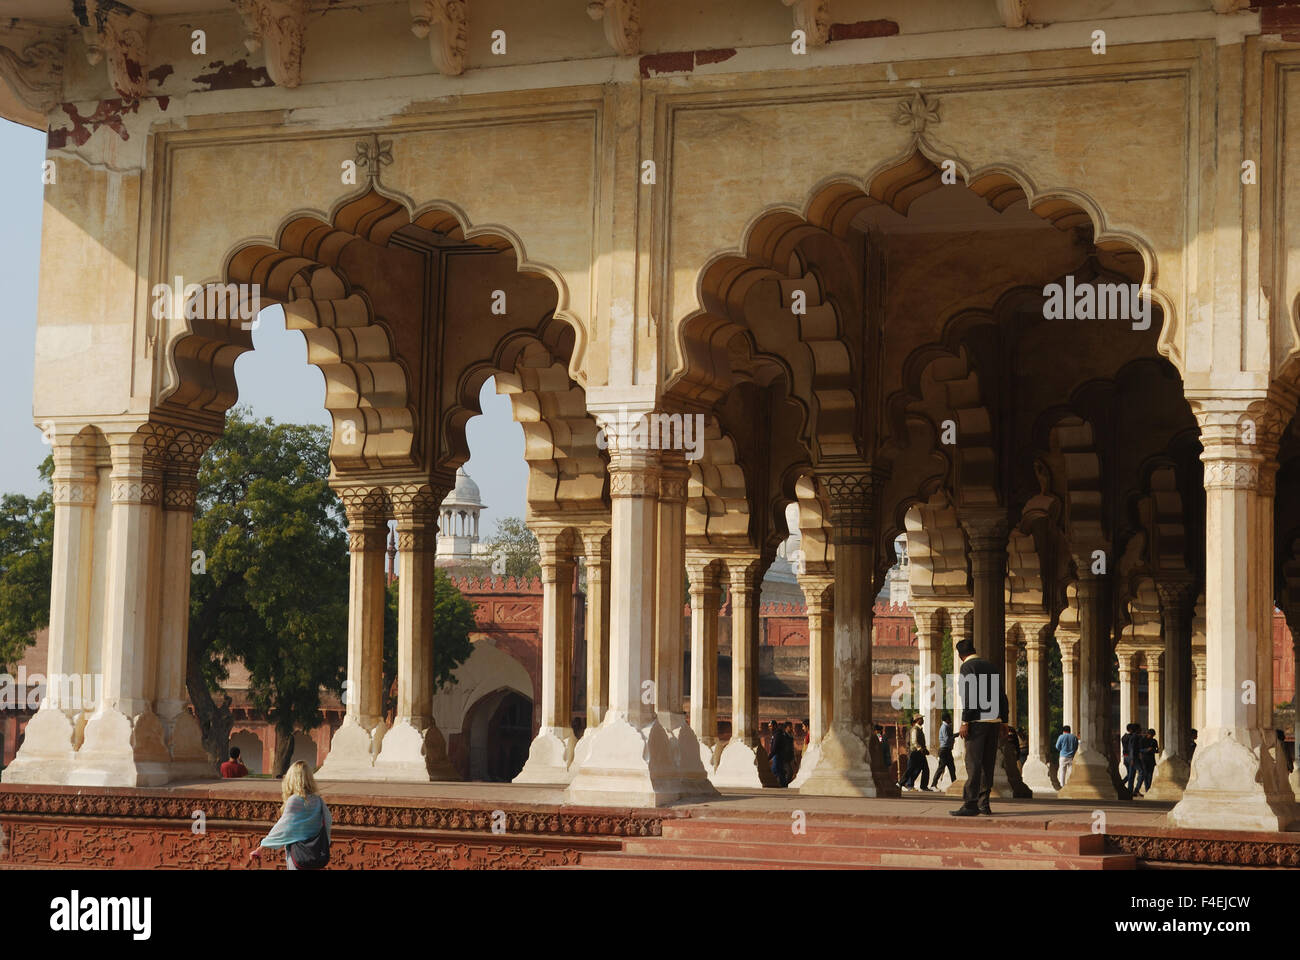 marble architecture inside agra fort india Stock Photo